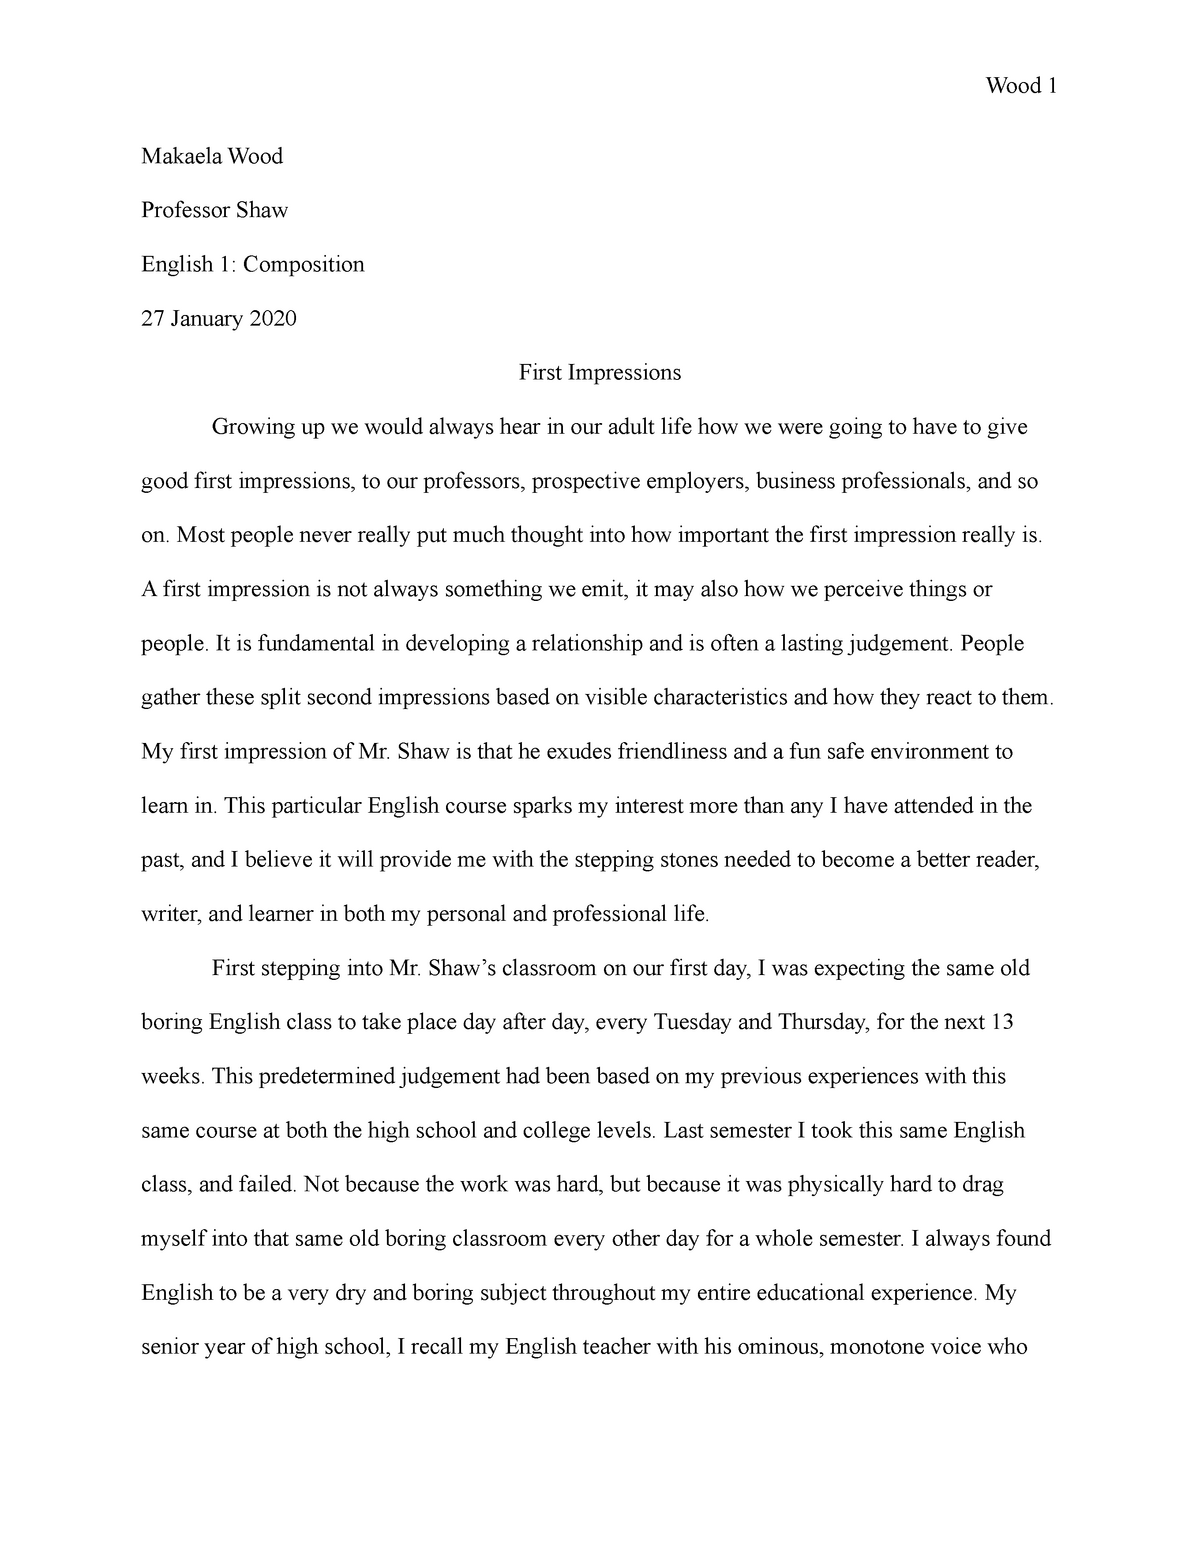 first impression in english class essay